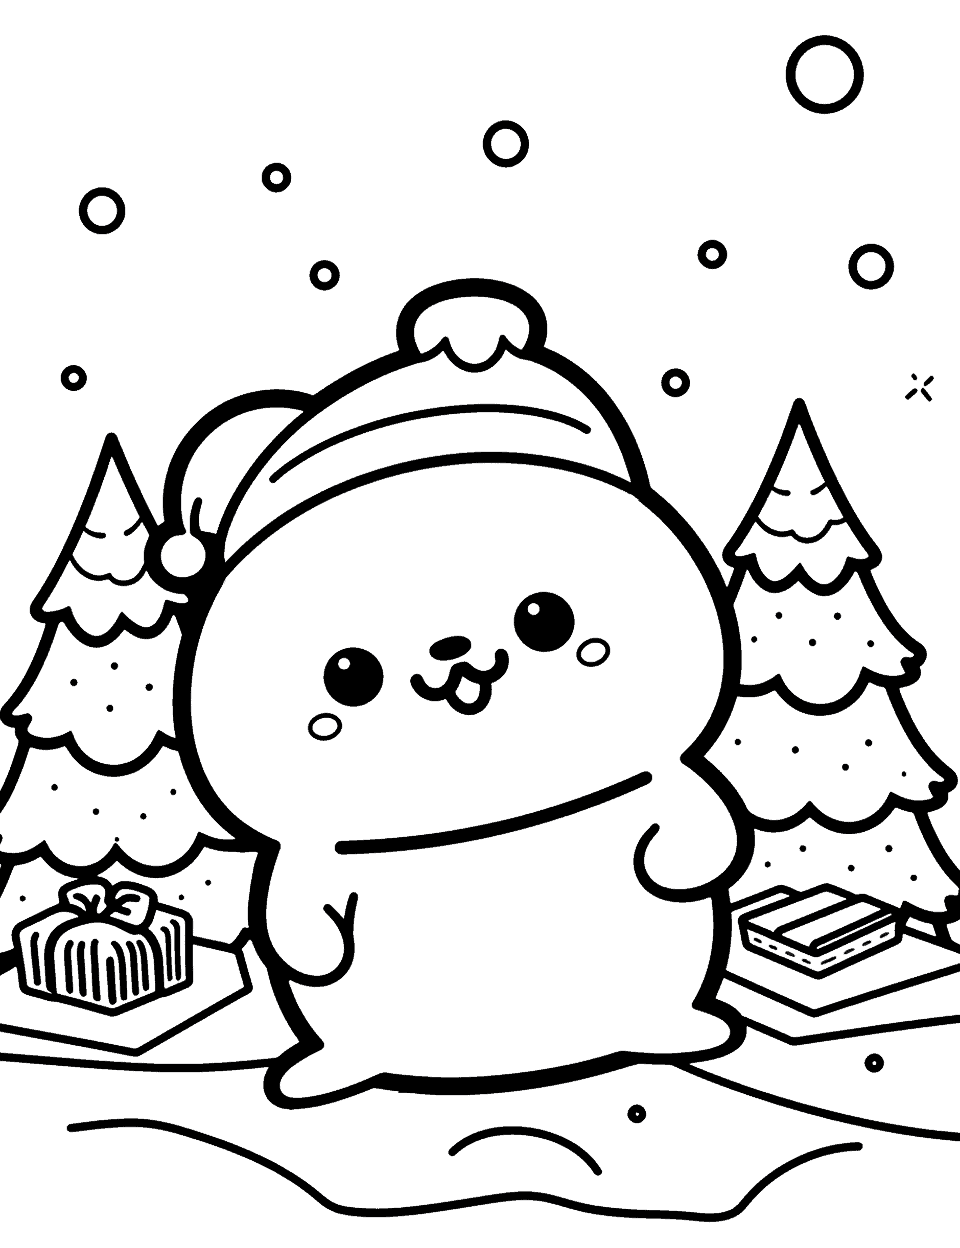 Nyan Cat's Winter Wonderland Kawaii Coloring Page - Nyan Cat having a blast in a winter wonderland filled with snowflakes and cane trees.